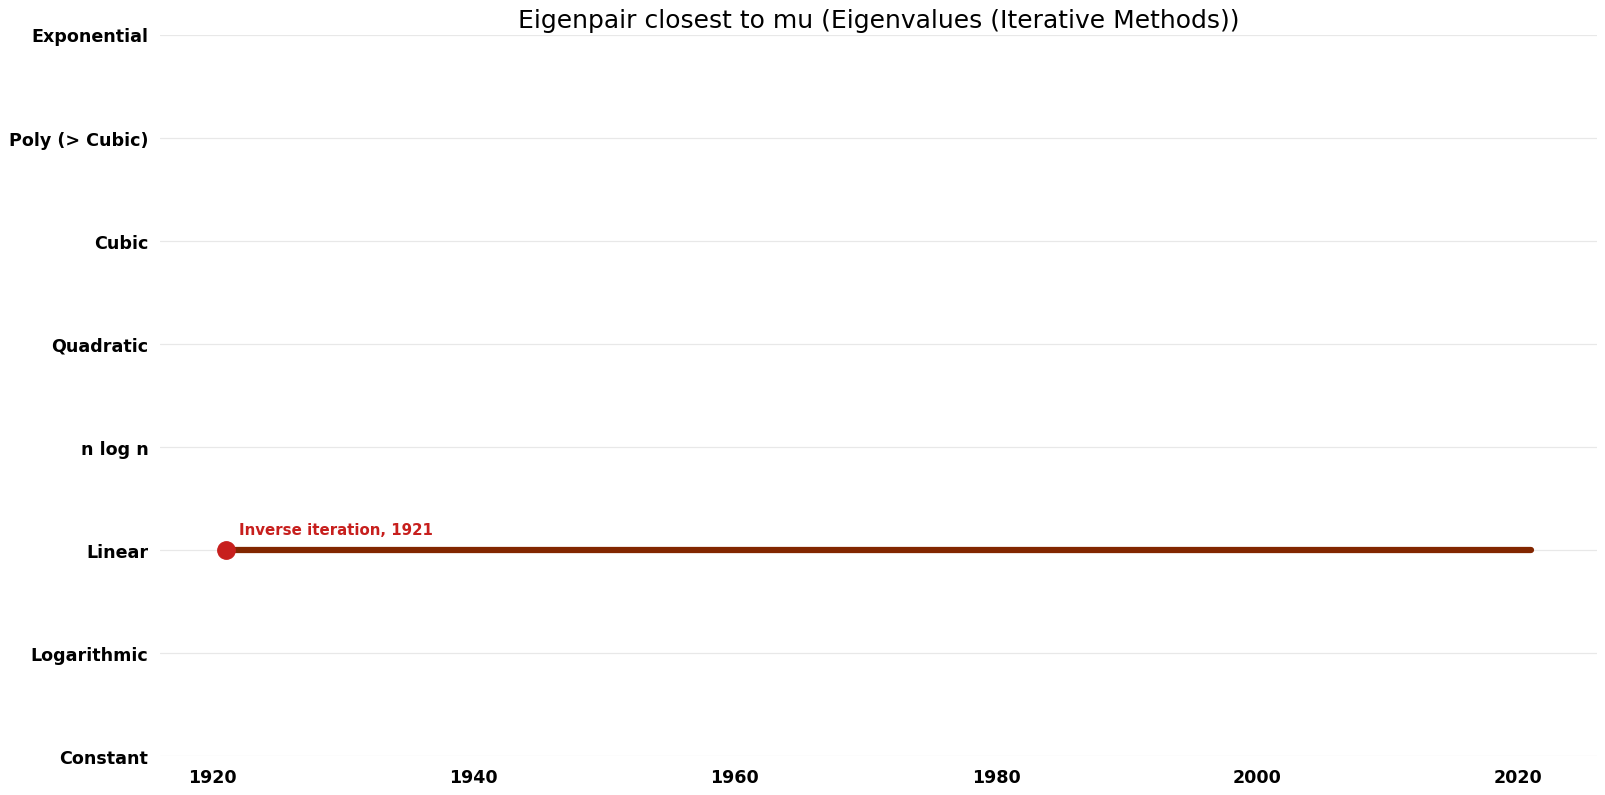 Eigenvalues (Iterative Methods) - Eigenpair closest to mu - Time.png